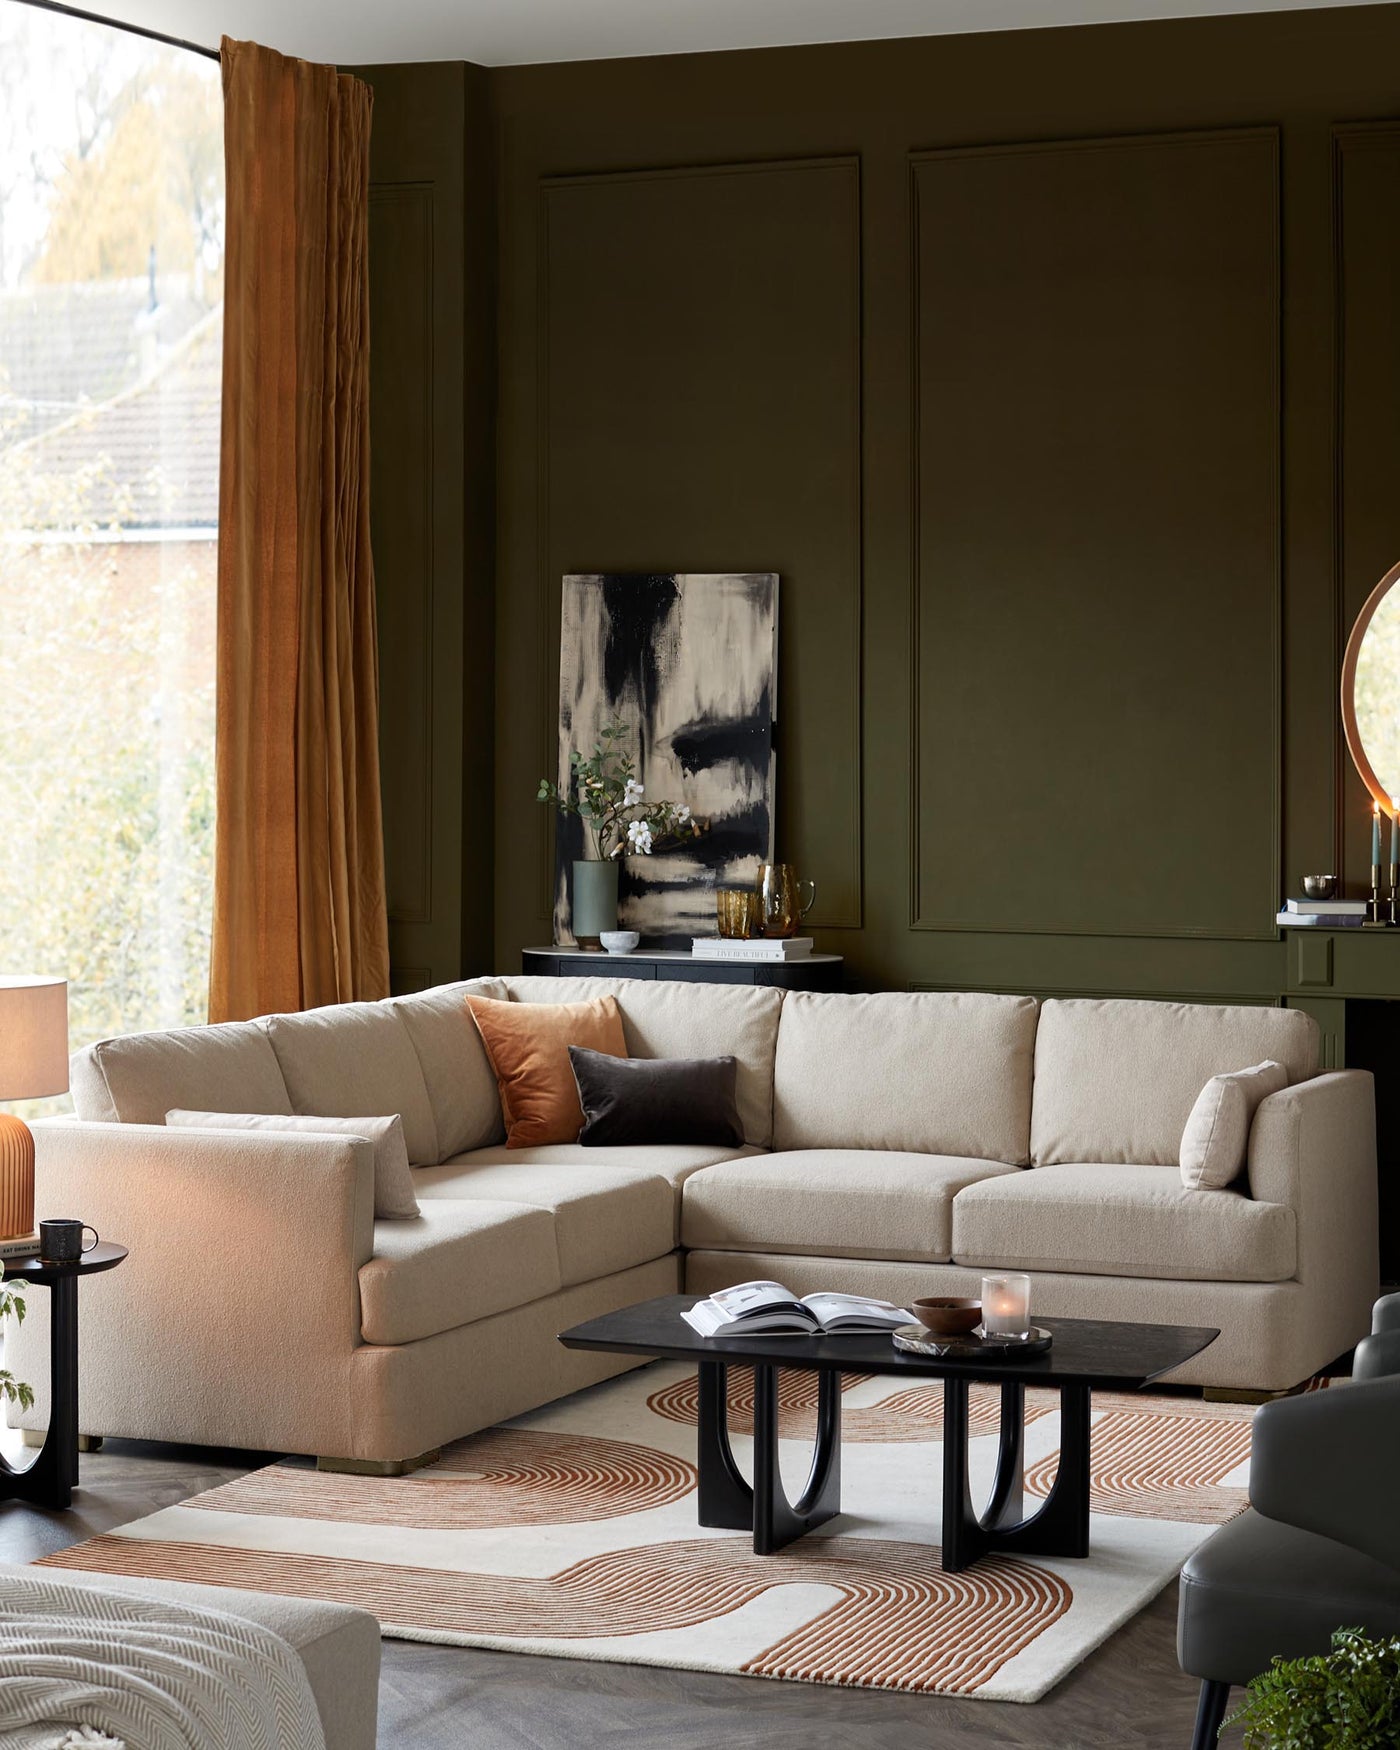 Modern L-shaped sectional sofa in a light beige fabric with plush cushions and a chaise lounge extension, complemented by a unique black coffee table featuring an oval-shaped top and artistic curved base. A contemporary cream and terracotta rug anchors the furniture in the space.